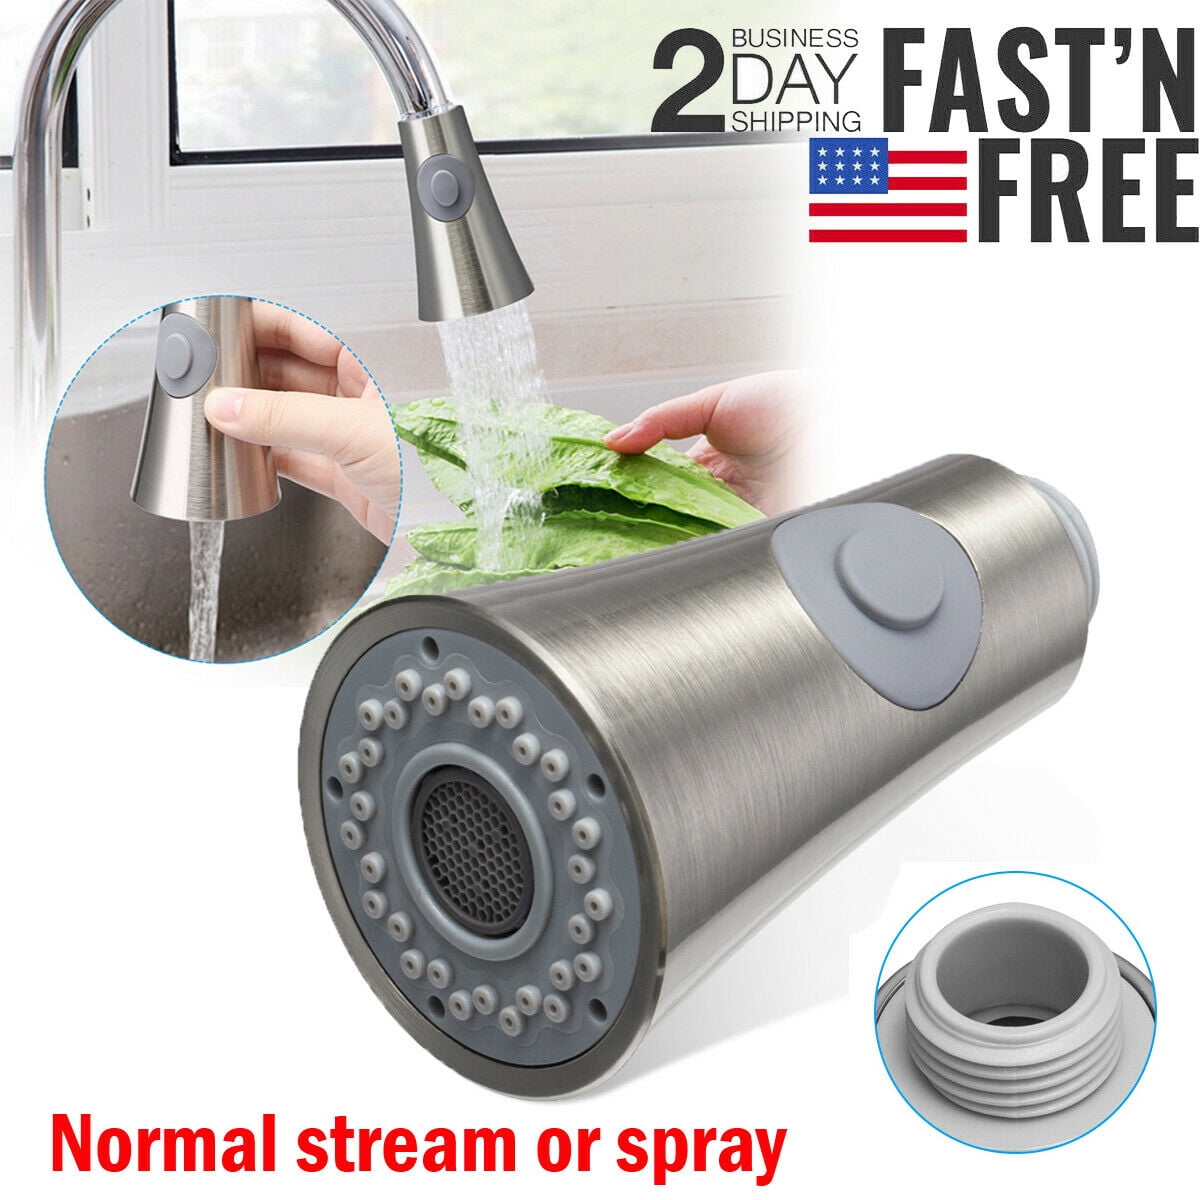 NEW Kitchen Sink Pull-Down Faucet Sprayer Pull Out Spray Head Replacement Head